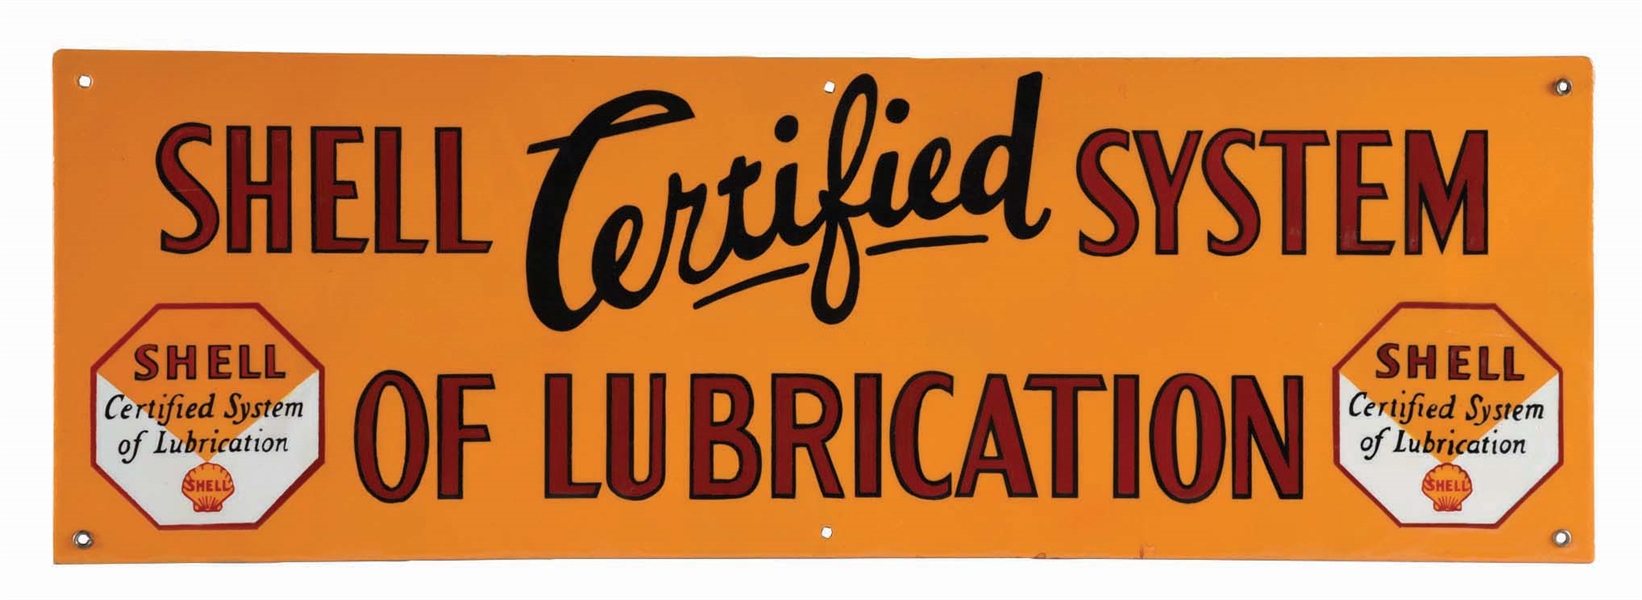 SHELL CERTIFIED SYSTEM OF LUBRICATION PORCELAIN SIGN.